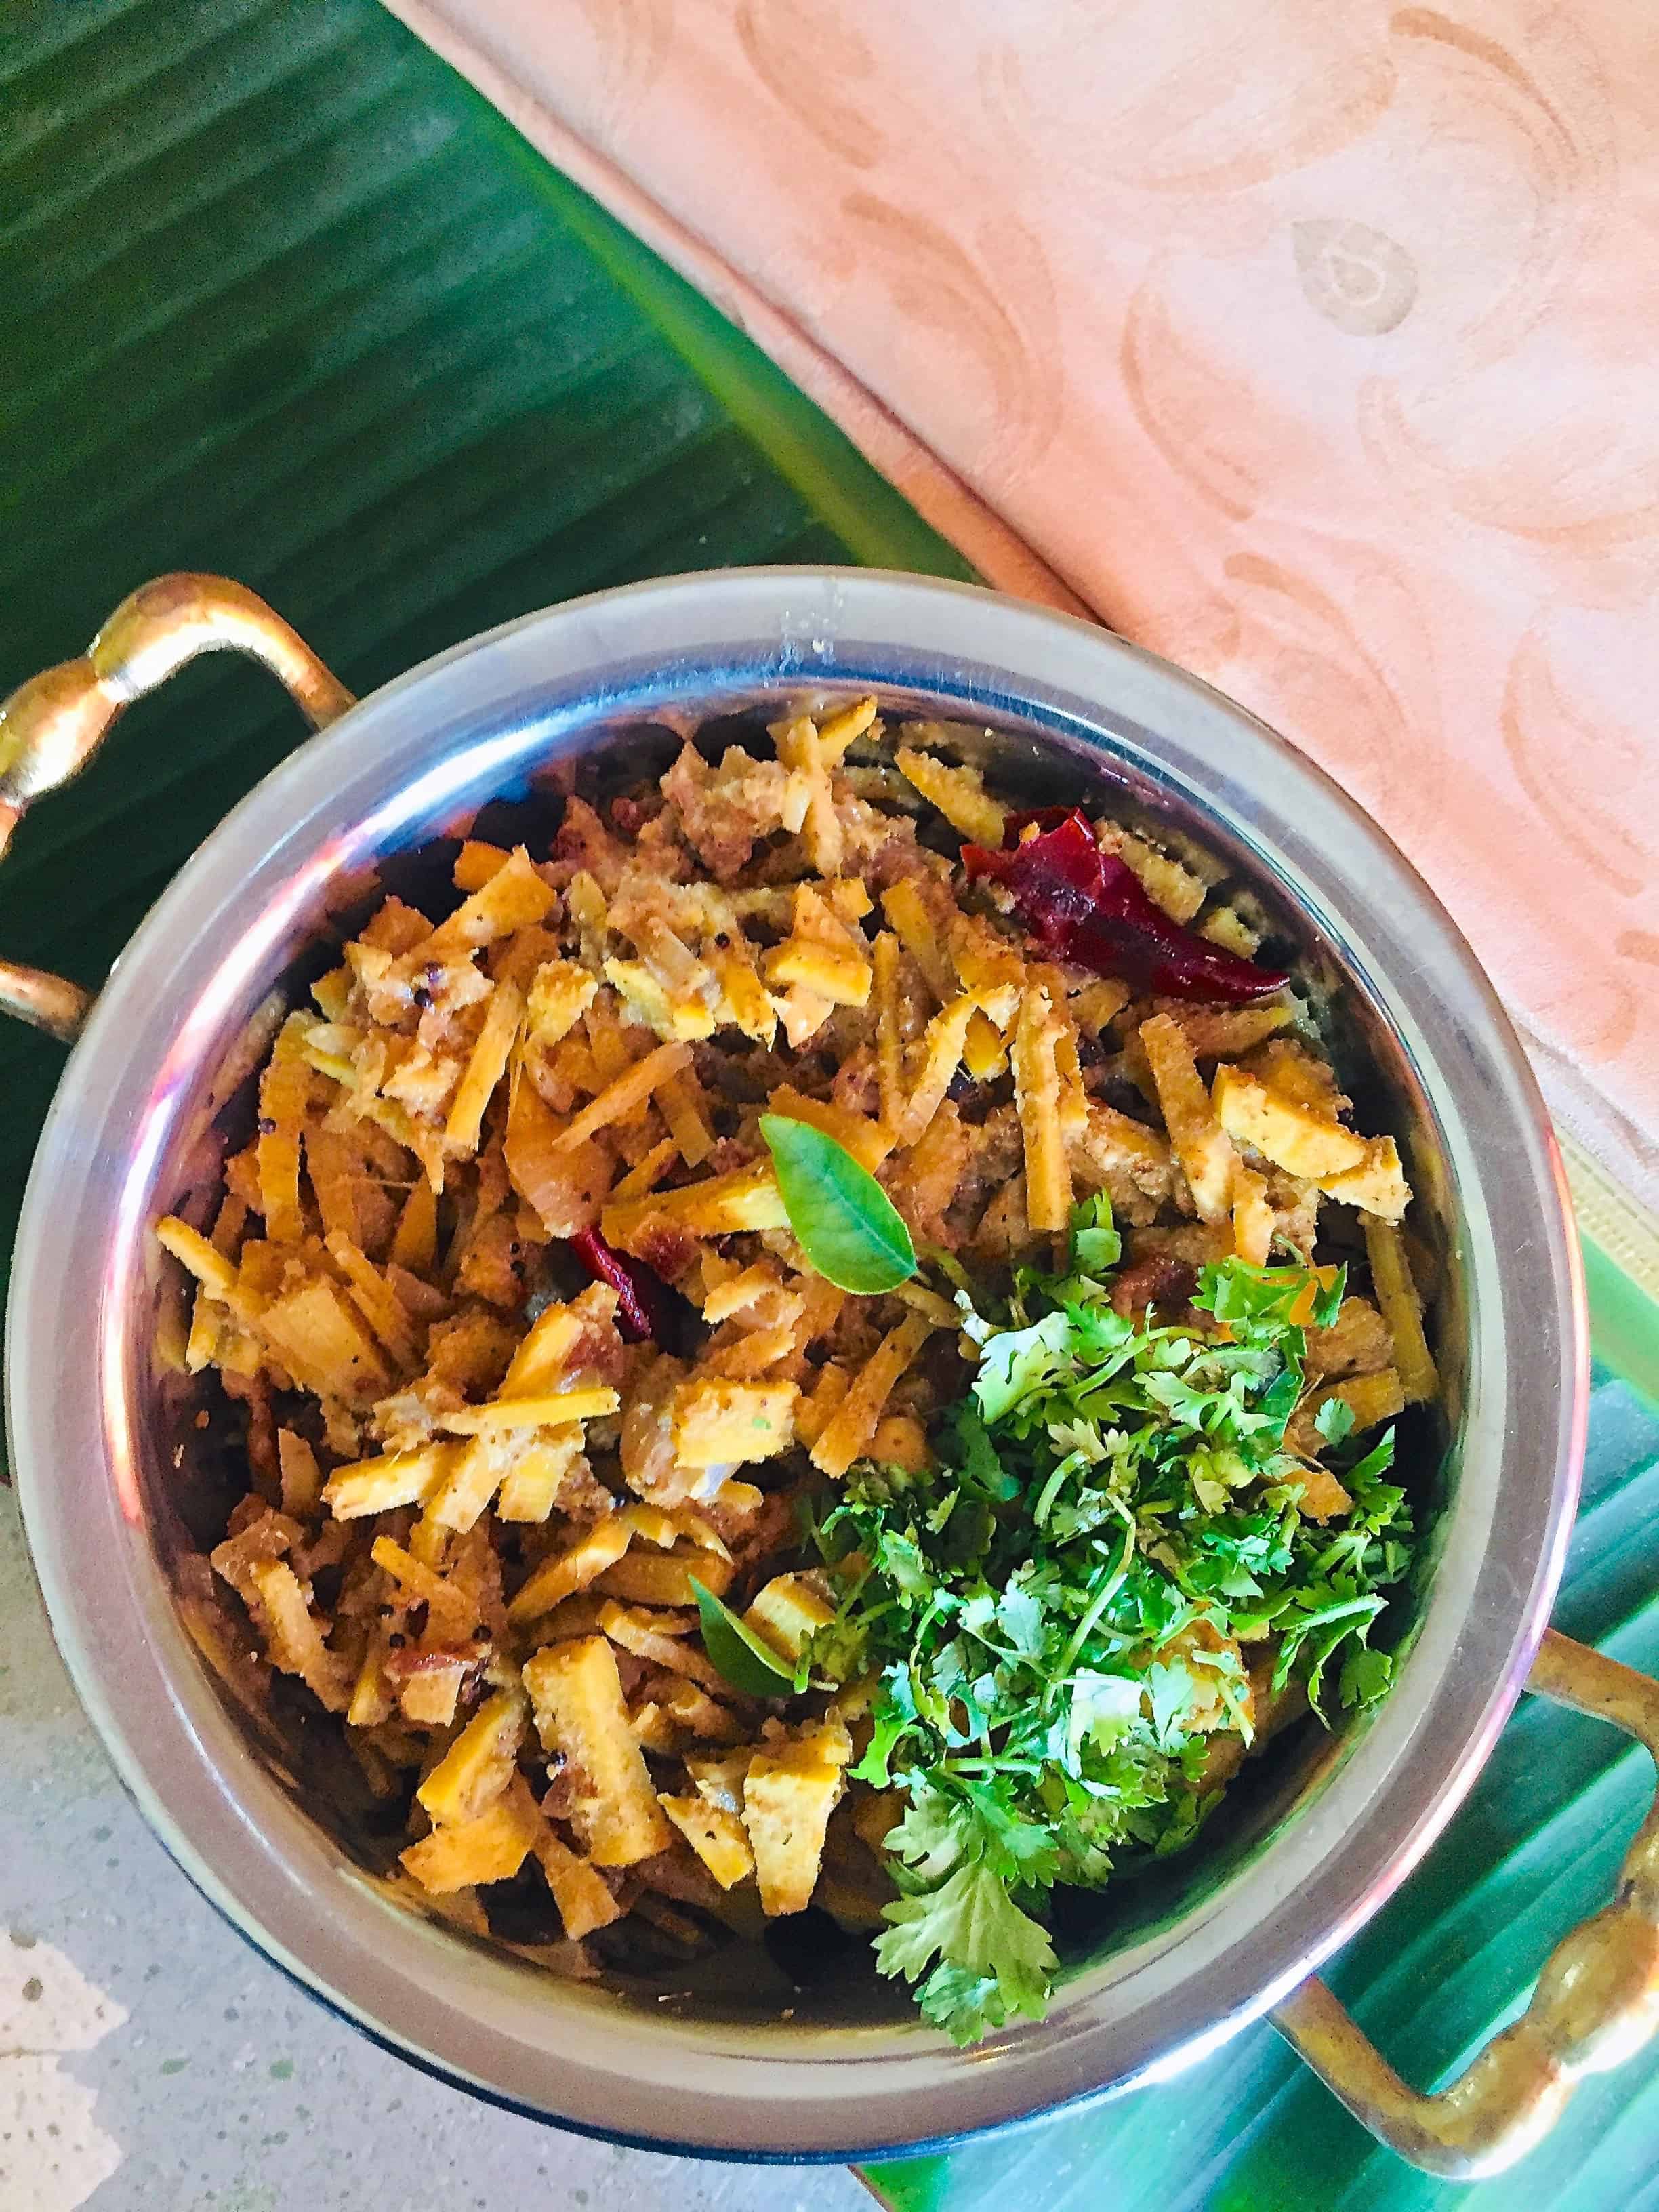 Bamboo shoot curry served in a brass bowl with garnish of coriander leaves, resting on a banana leaf with a pale pink mysore silk saree alongside